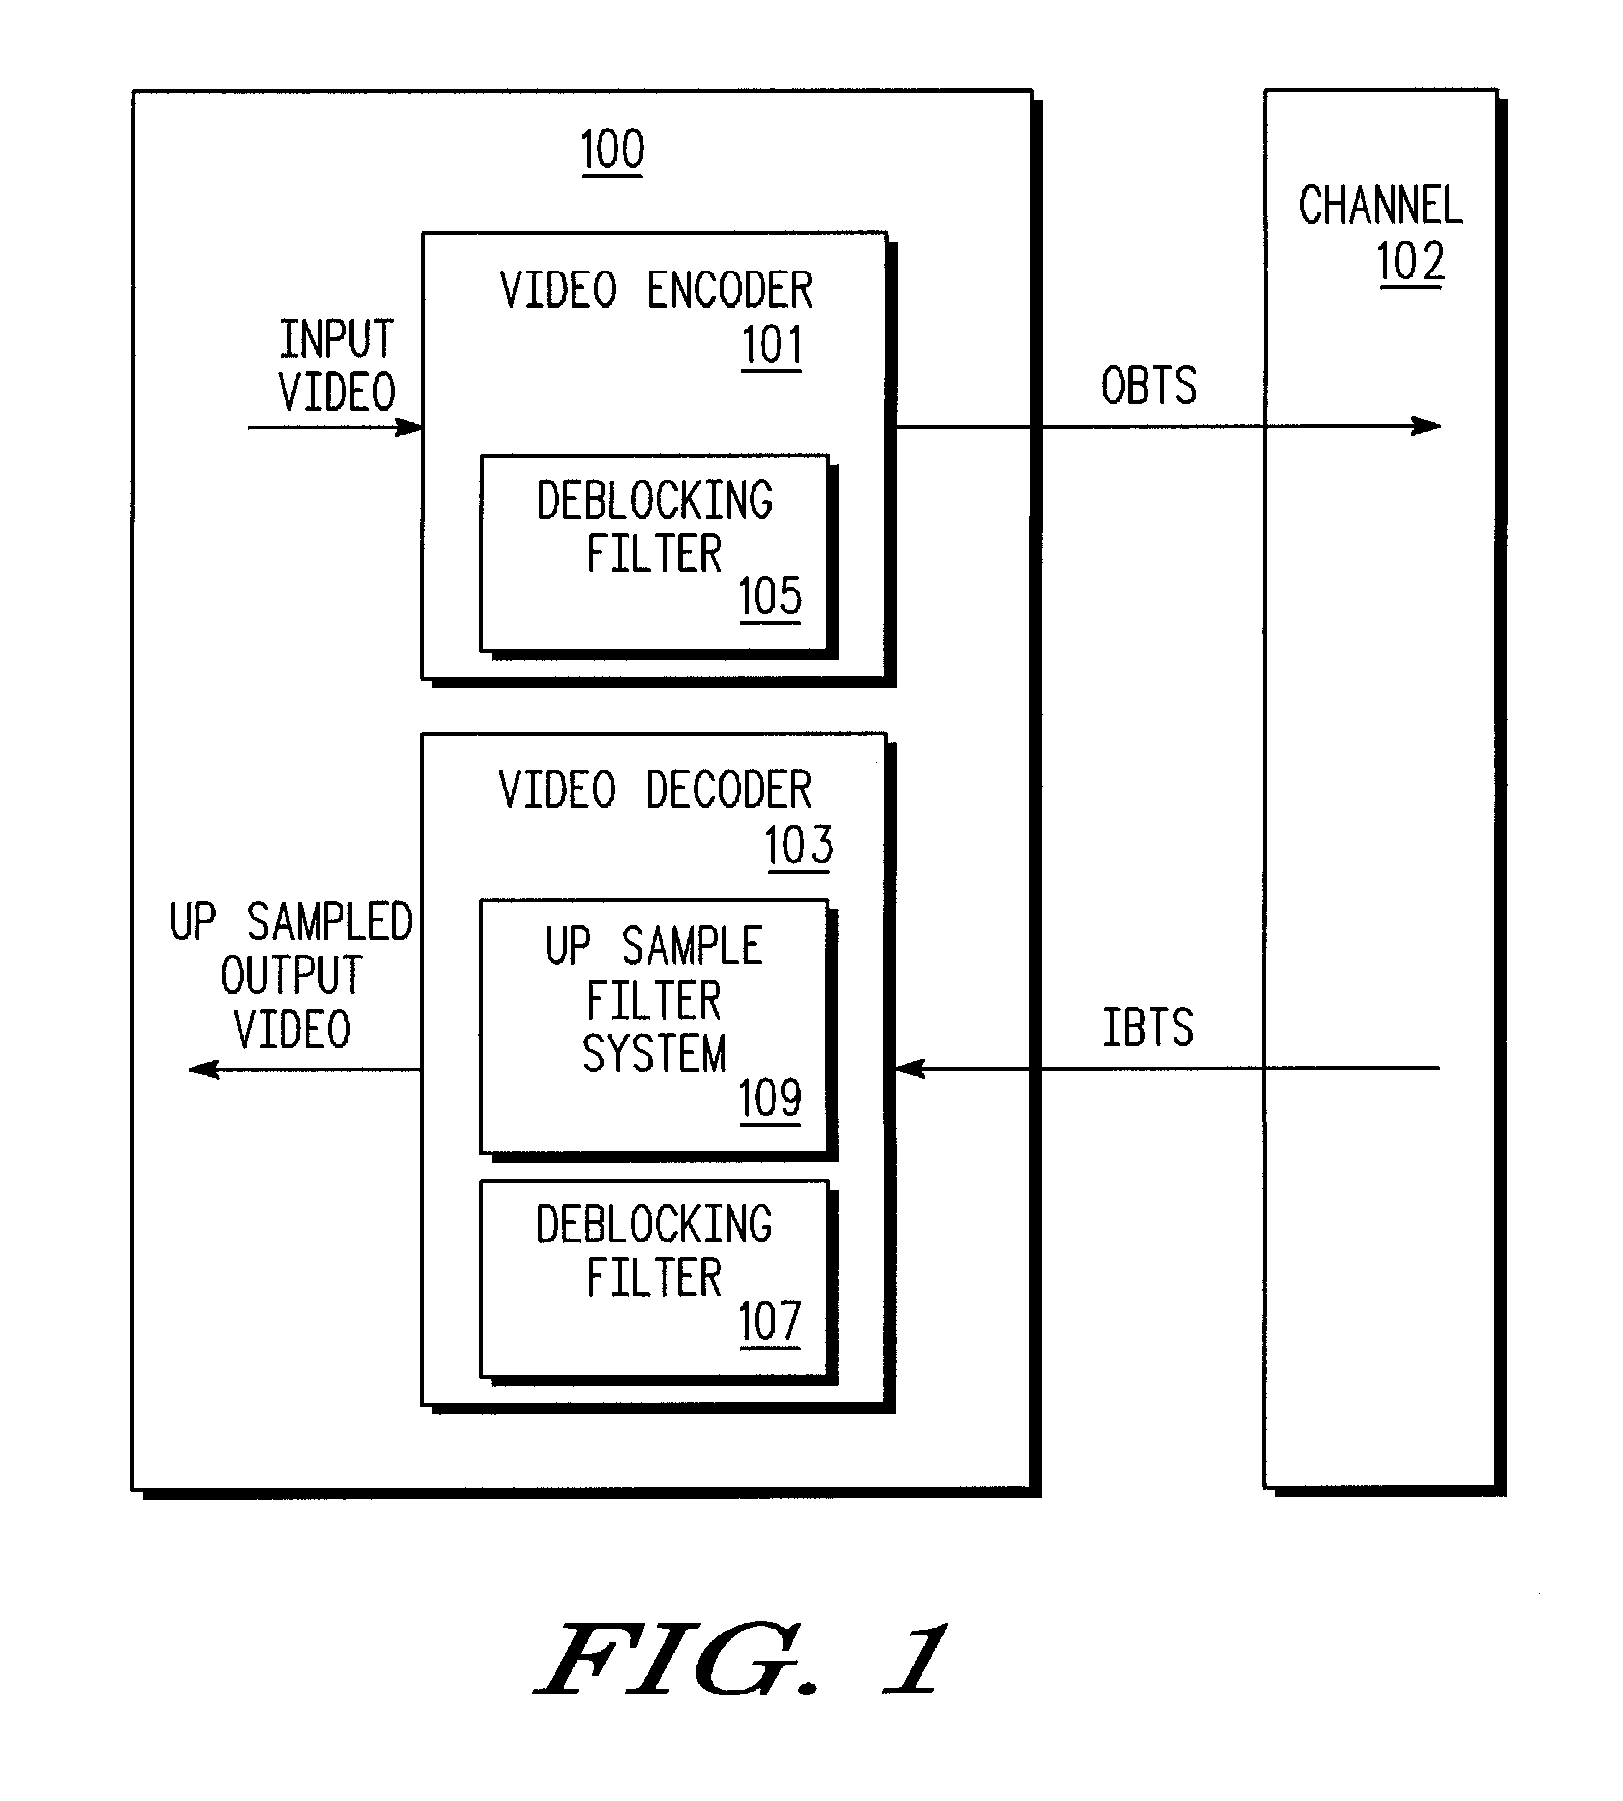 Reduction of block effects in spatially re-sampled image information for block-based image coding